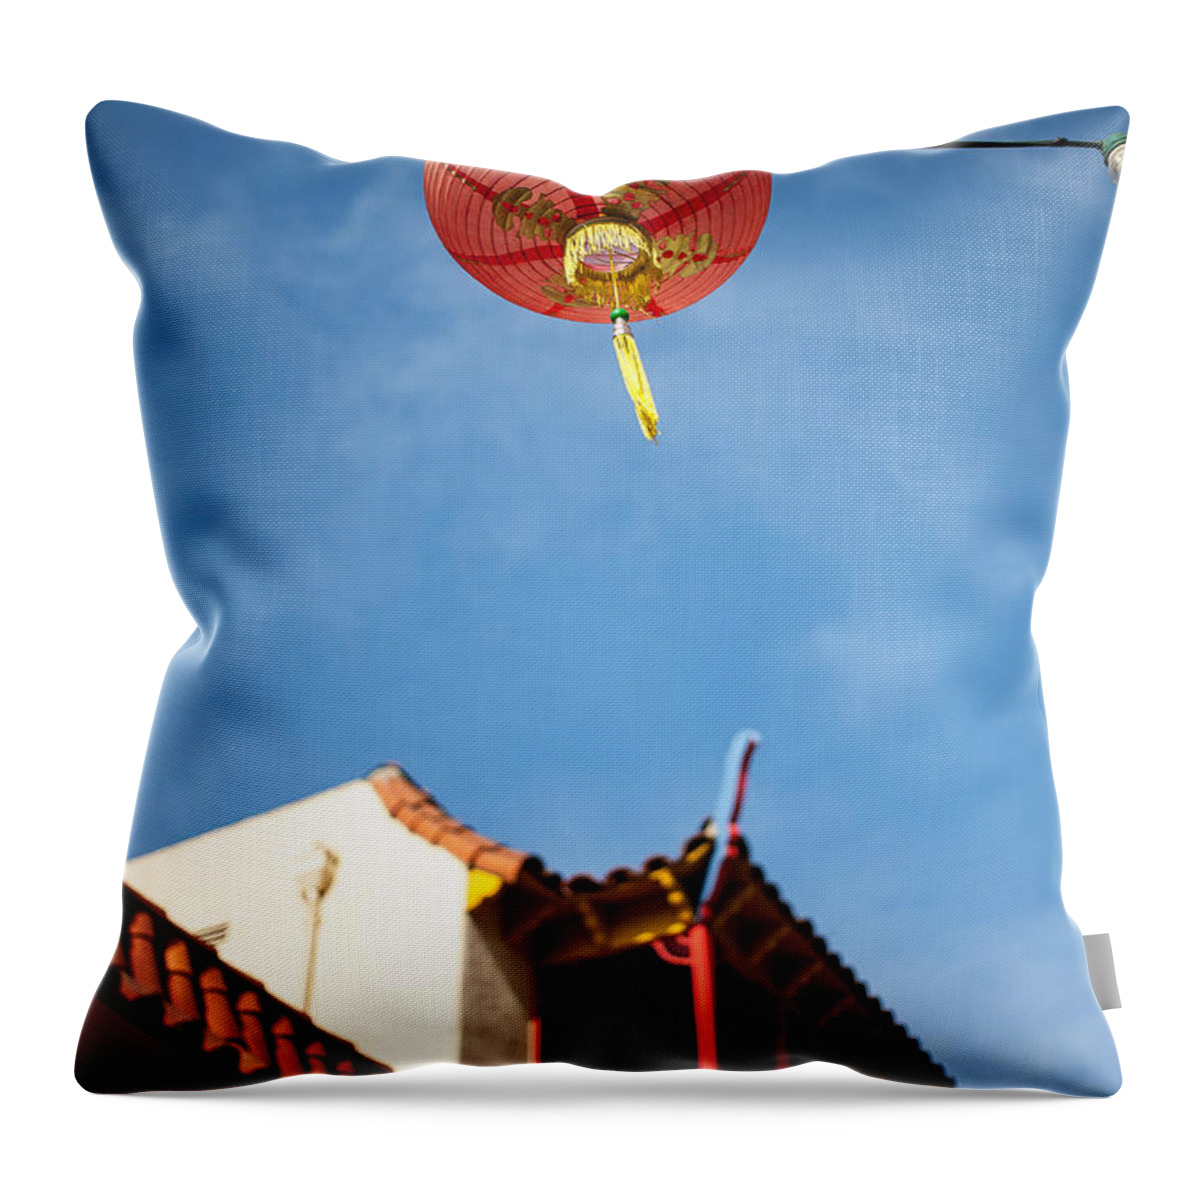 Buildings Throw Pillow featuring the photograph Chinese Lantern by Peter Tellone